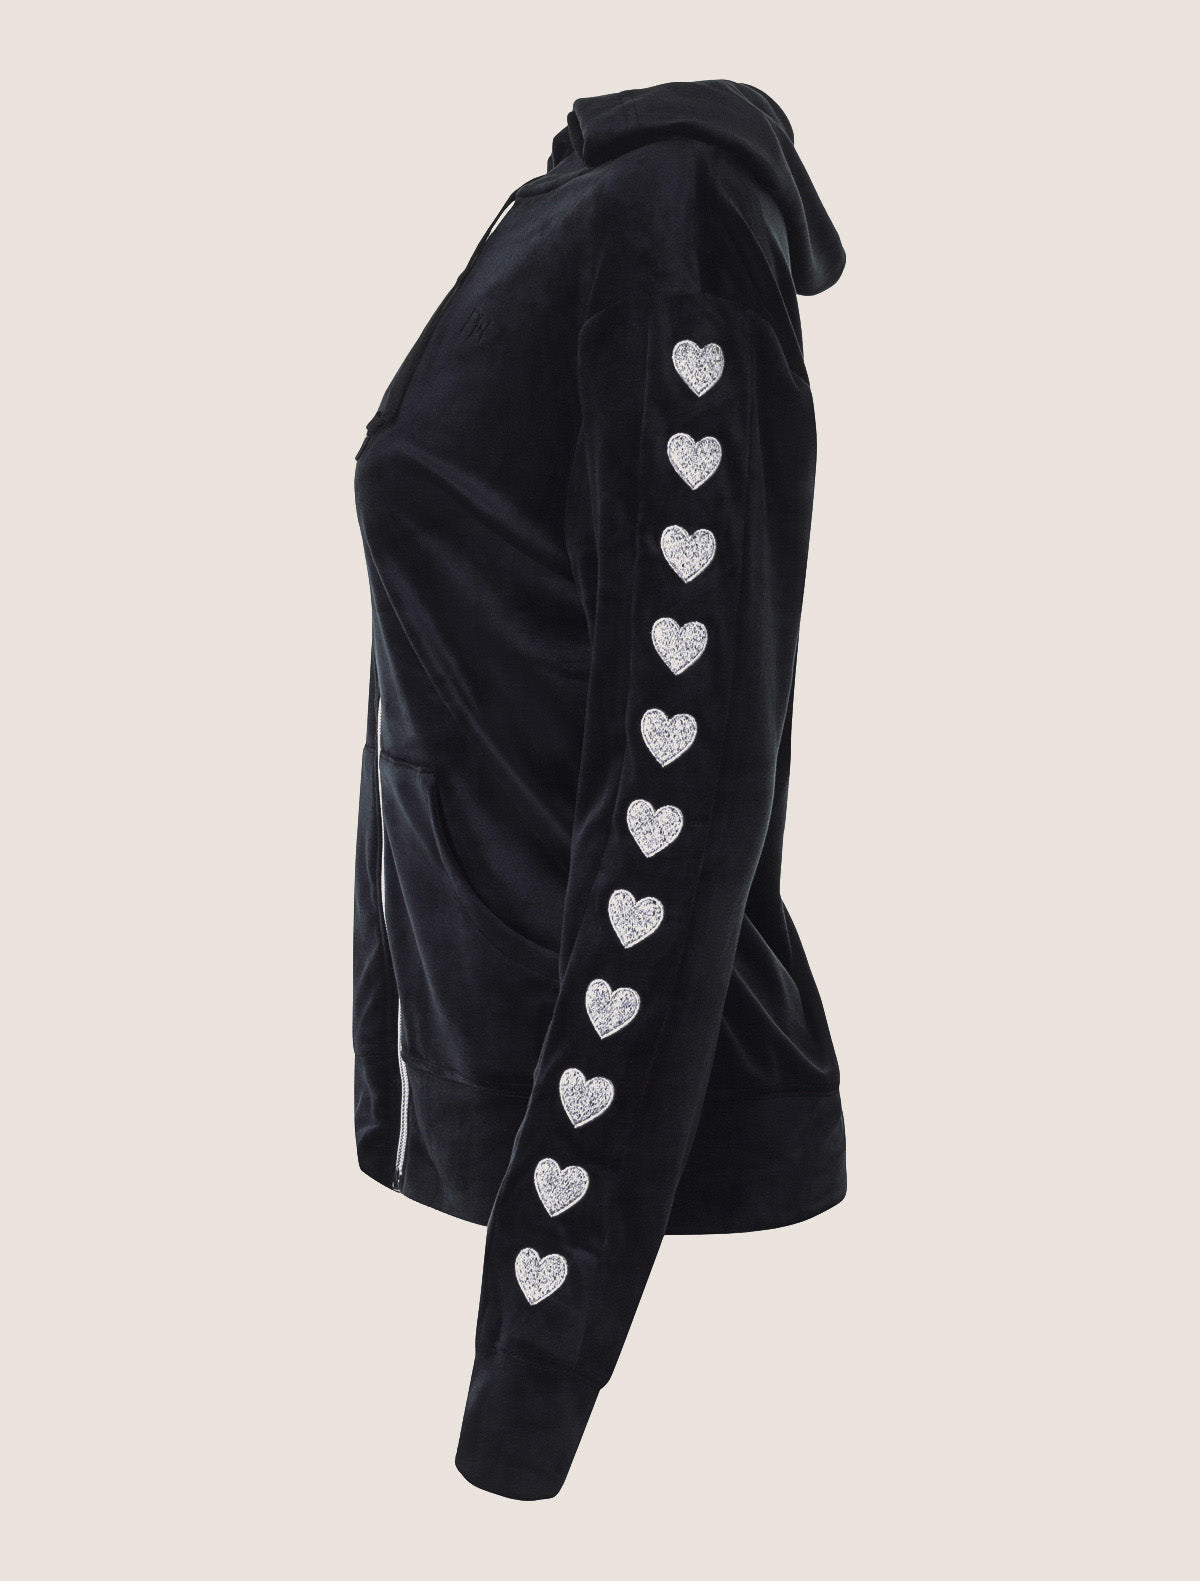 Heart on Your Sleeve Hoodie by Paris Hilton Tracksuits